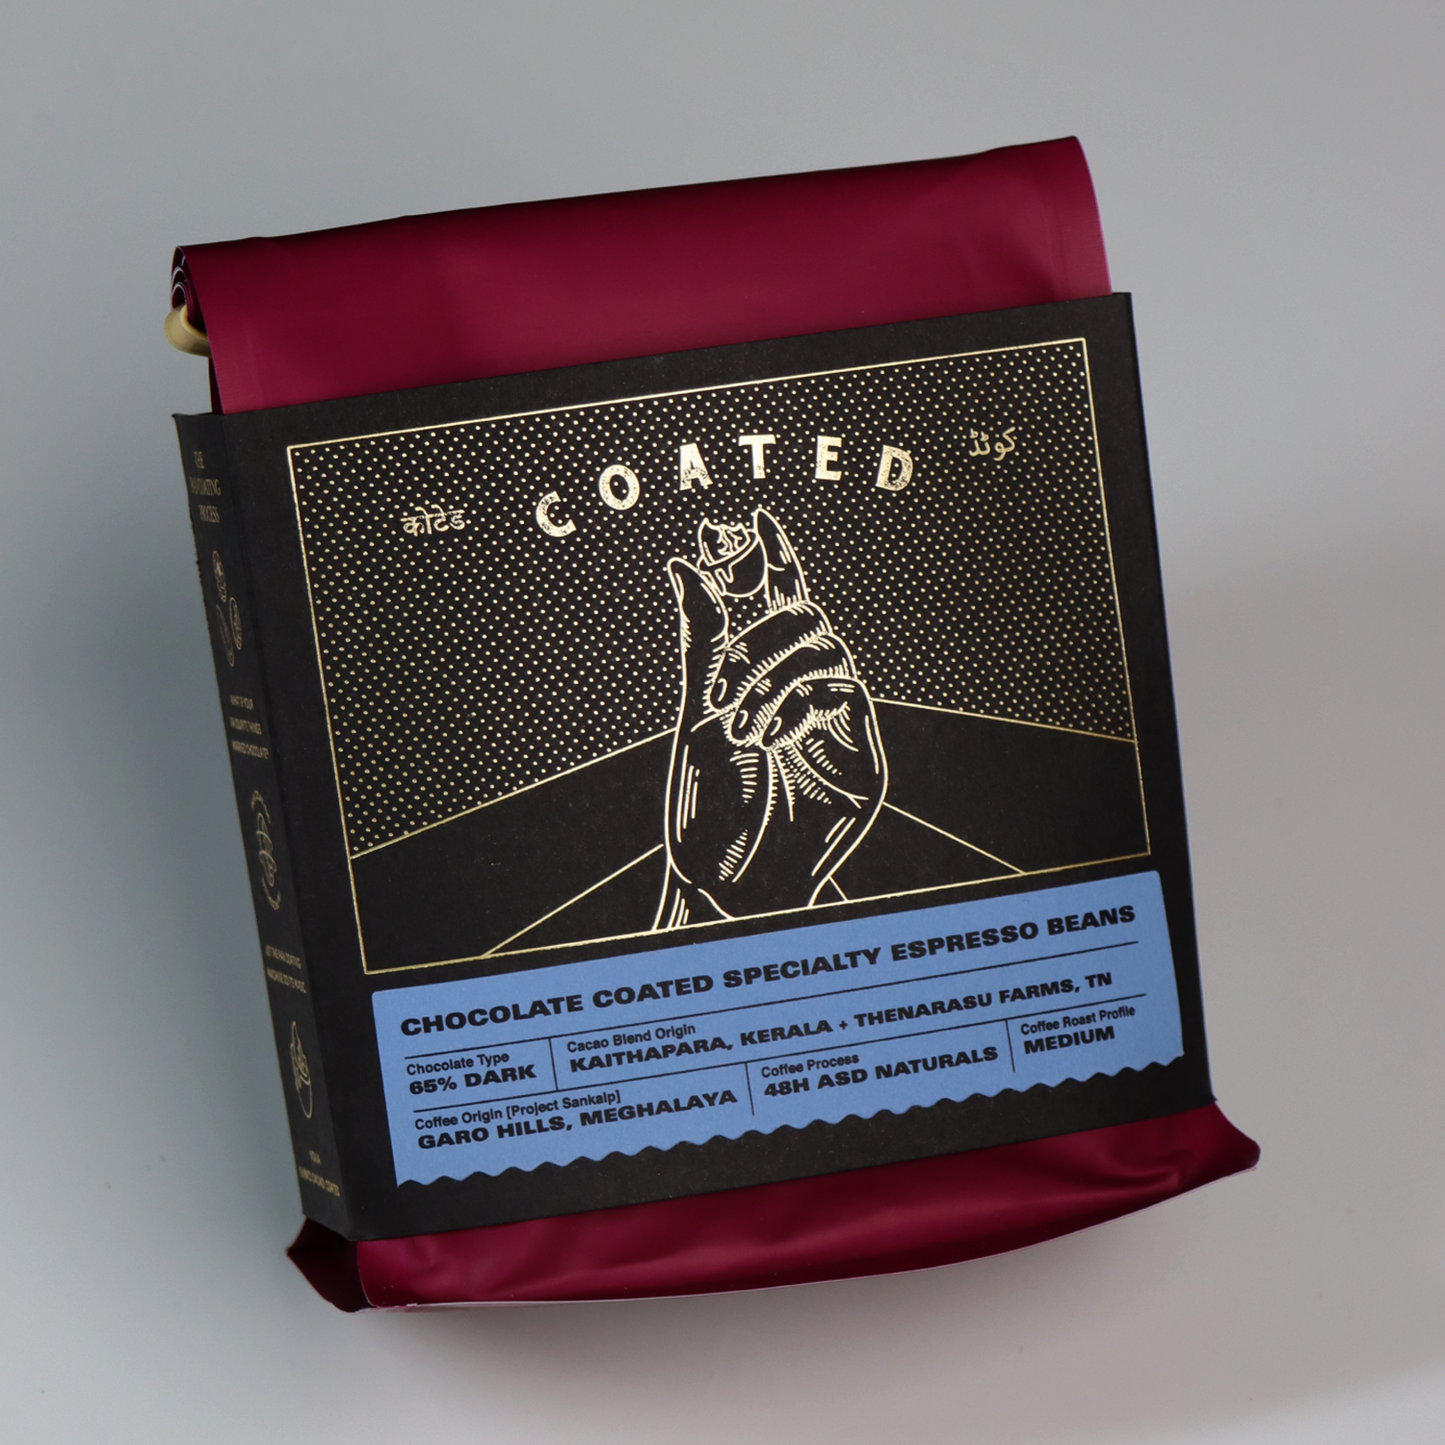 Coated: Chocolate Coated Specialty Espresso Beans: Project Sankalp, Garo Hills (86+)